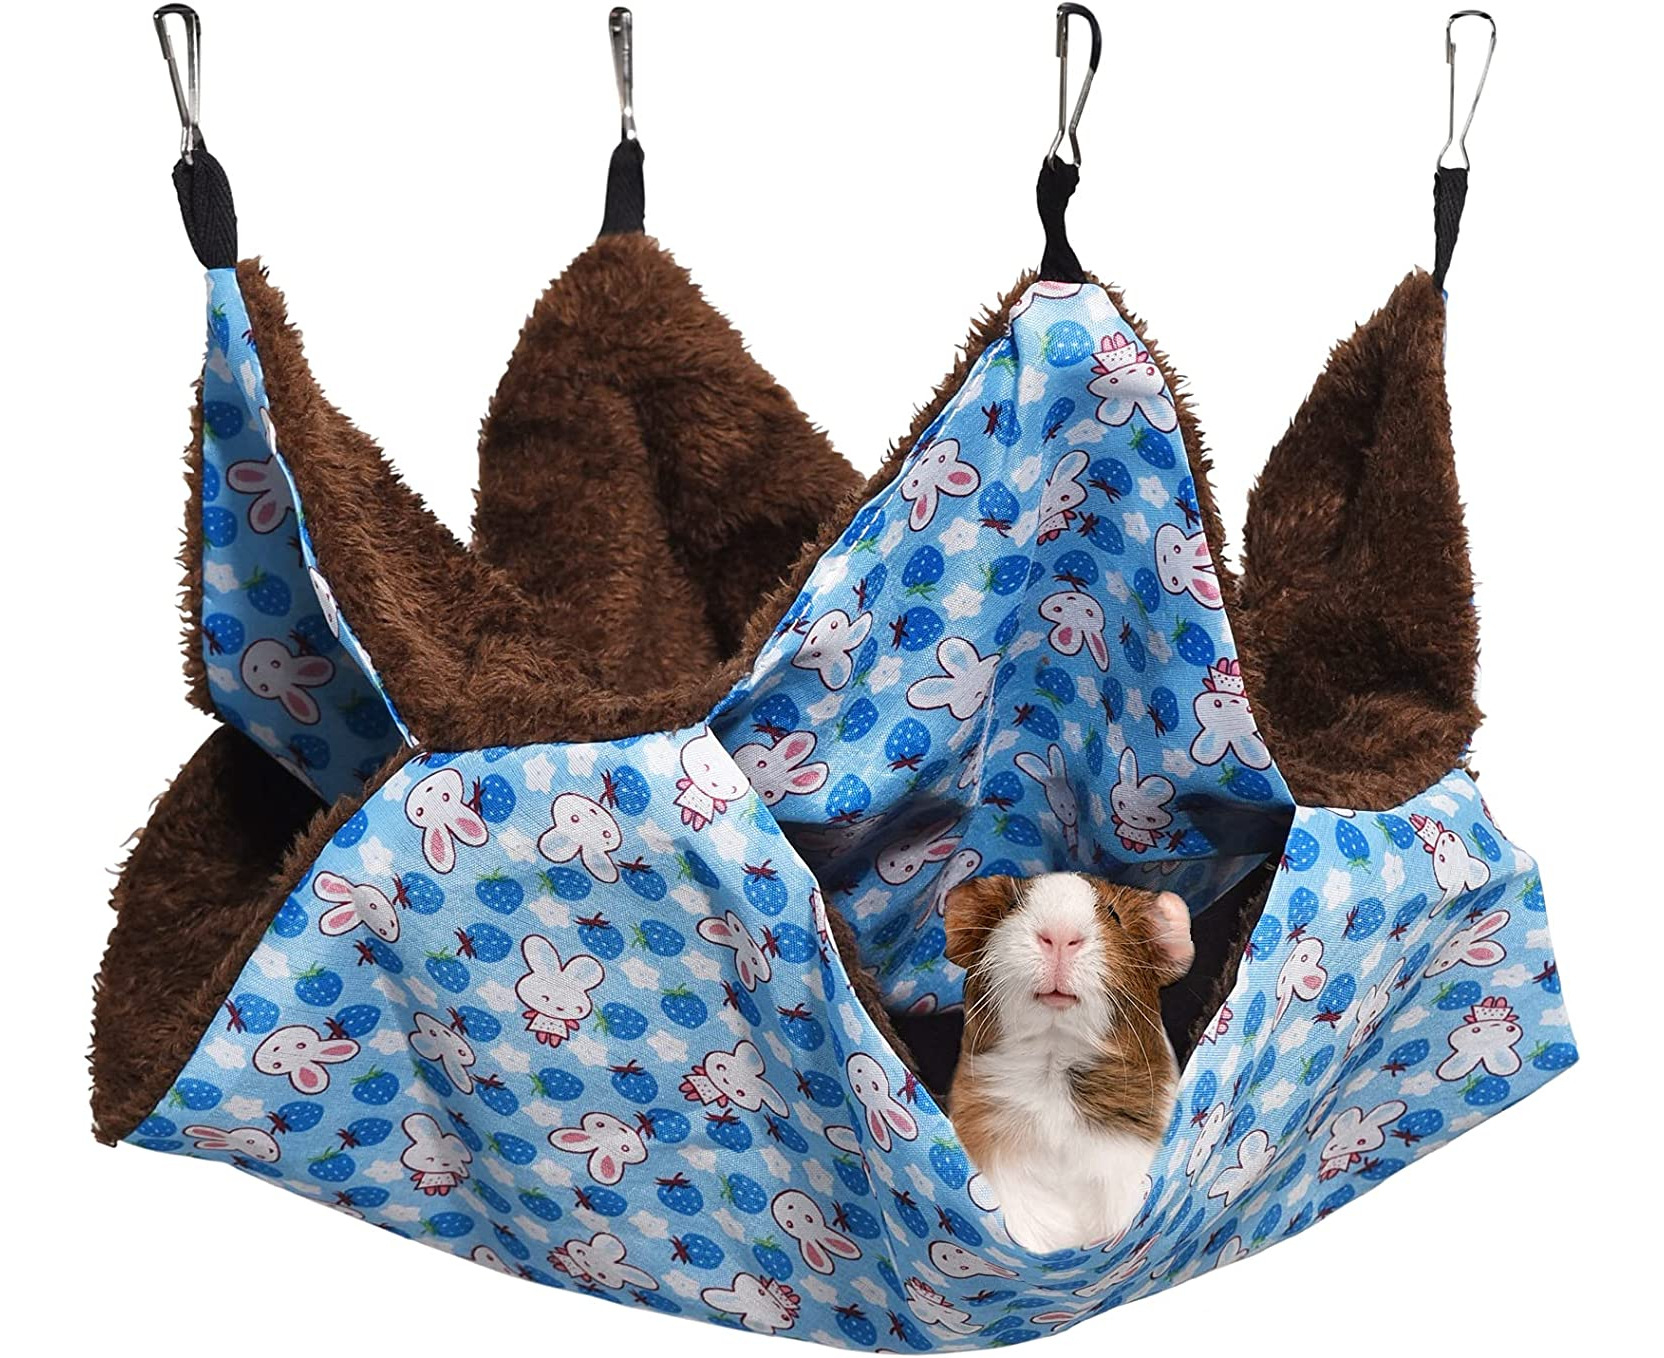 Small Pet Cage Hammock Warm Fleece Cage Hanging Hammock Double-Layer Sugar Glider Hammock Bed Pet Swinging Bed for Chinchilla Parrot Guinea Pig Ferret Squirrel Hamster Rat Playing Sleeping 